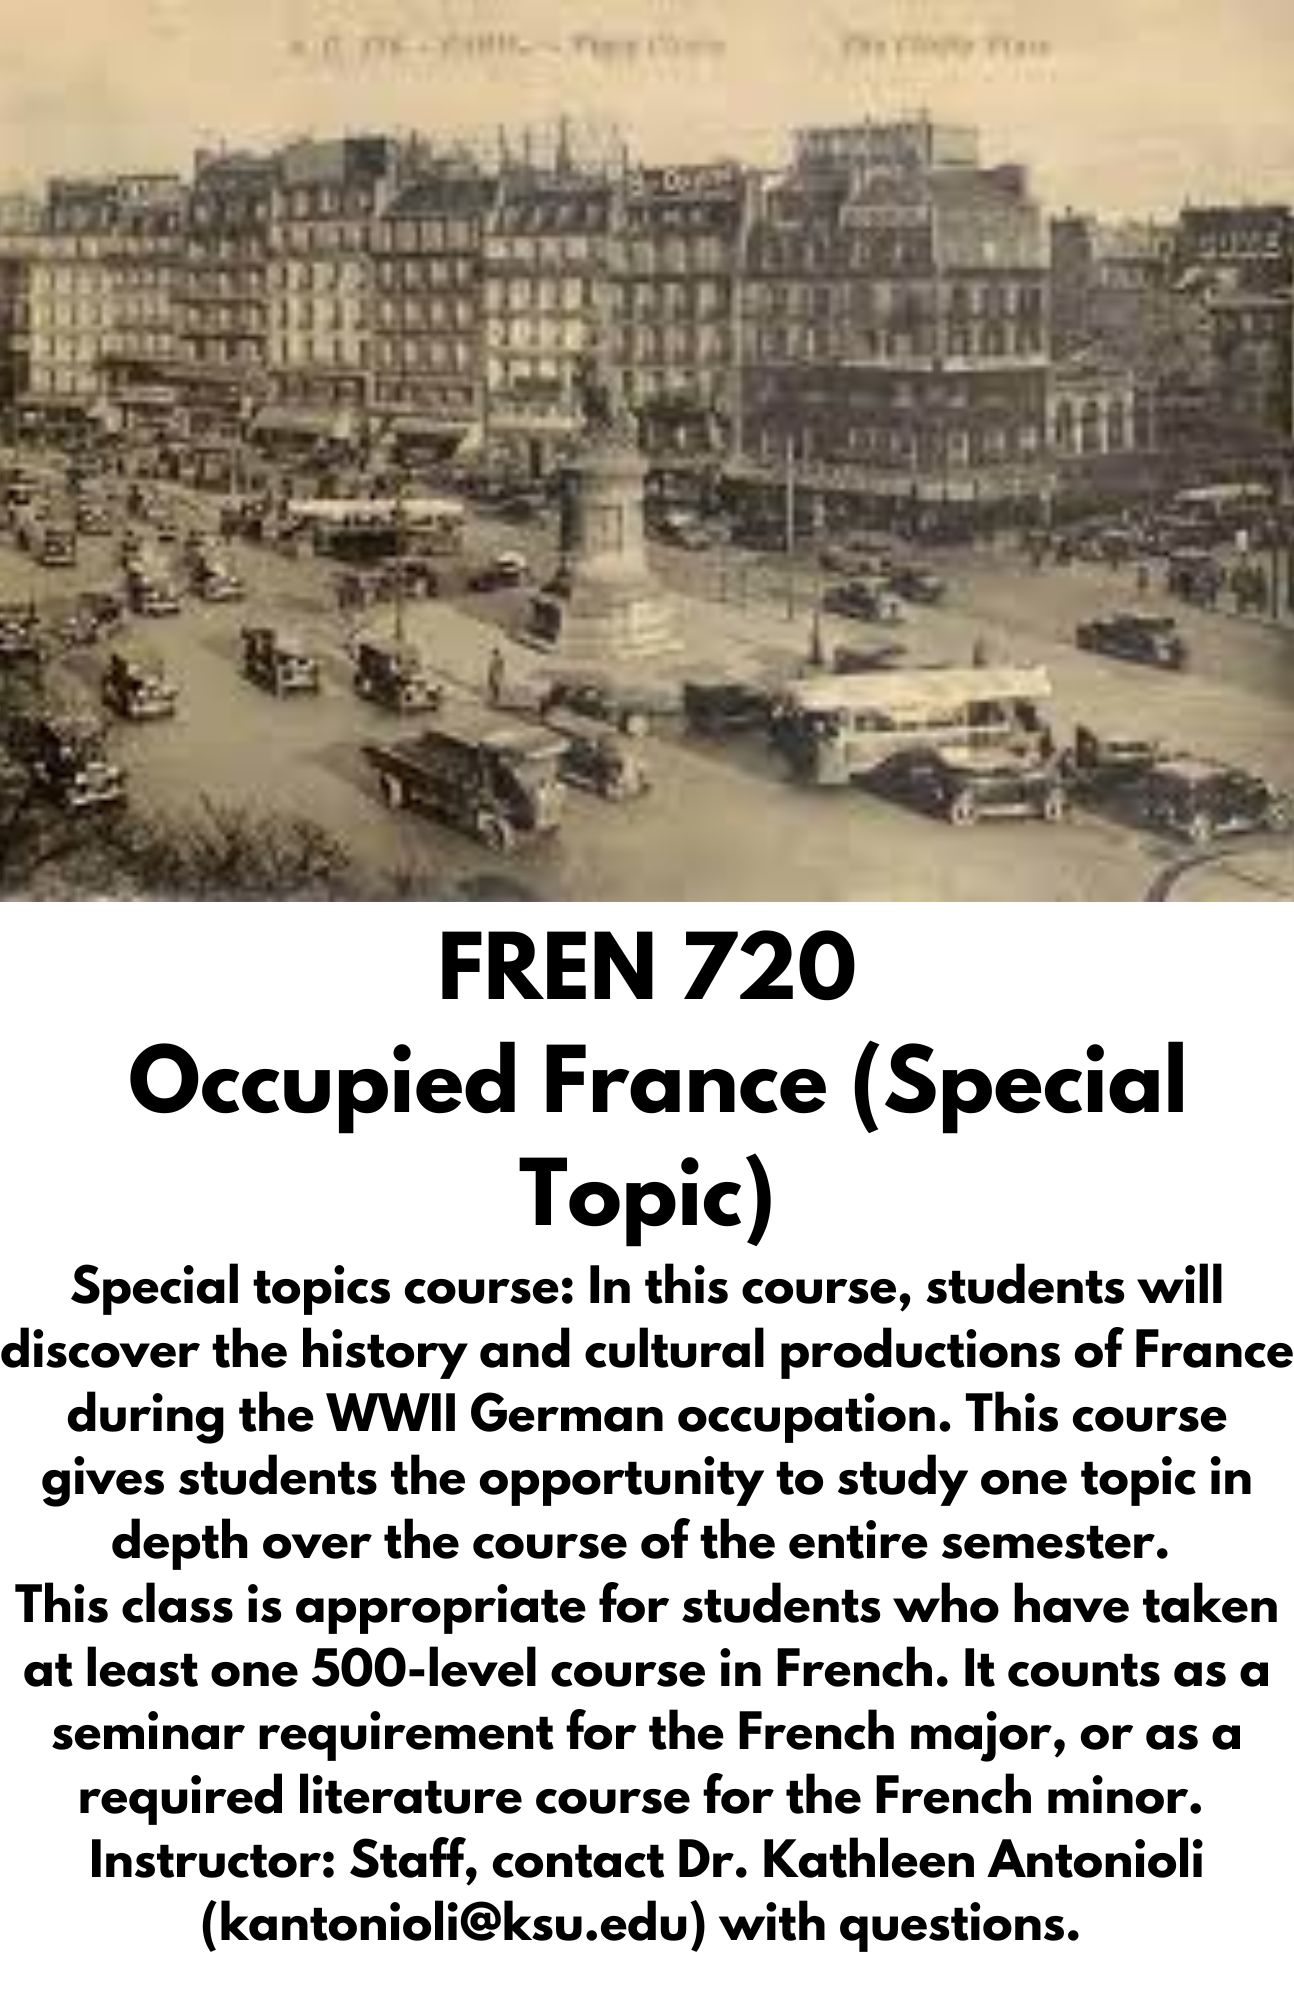 FREN 720  Occupied France (Special Topic) Special topics course: In this course, students will discover the history and cultural productions of France during the WWII German occupation. This course gives students the opportunity to study one topic in depth over the course of the entire semester. ​ This class is appropriate for students who have taken at least one 500-level course in French. It counts as a seminar requirement for the French major, or as a required literature course for the French minor. ​ Instructor: Staff, contact Dr. Kathleen Antonioli (kantonioli@ksu.edu) with questions.